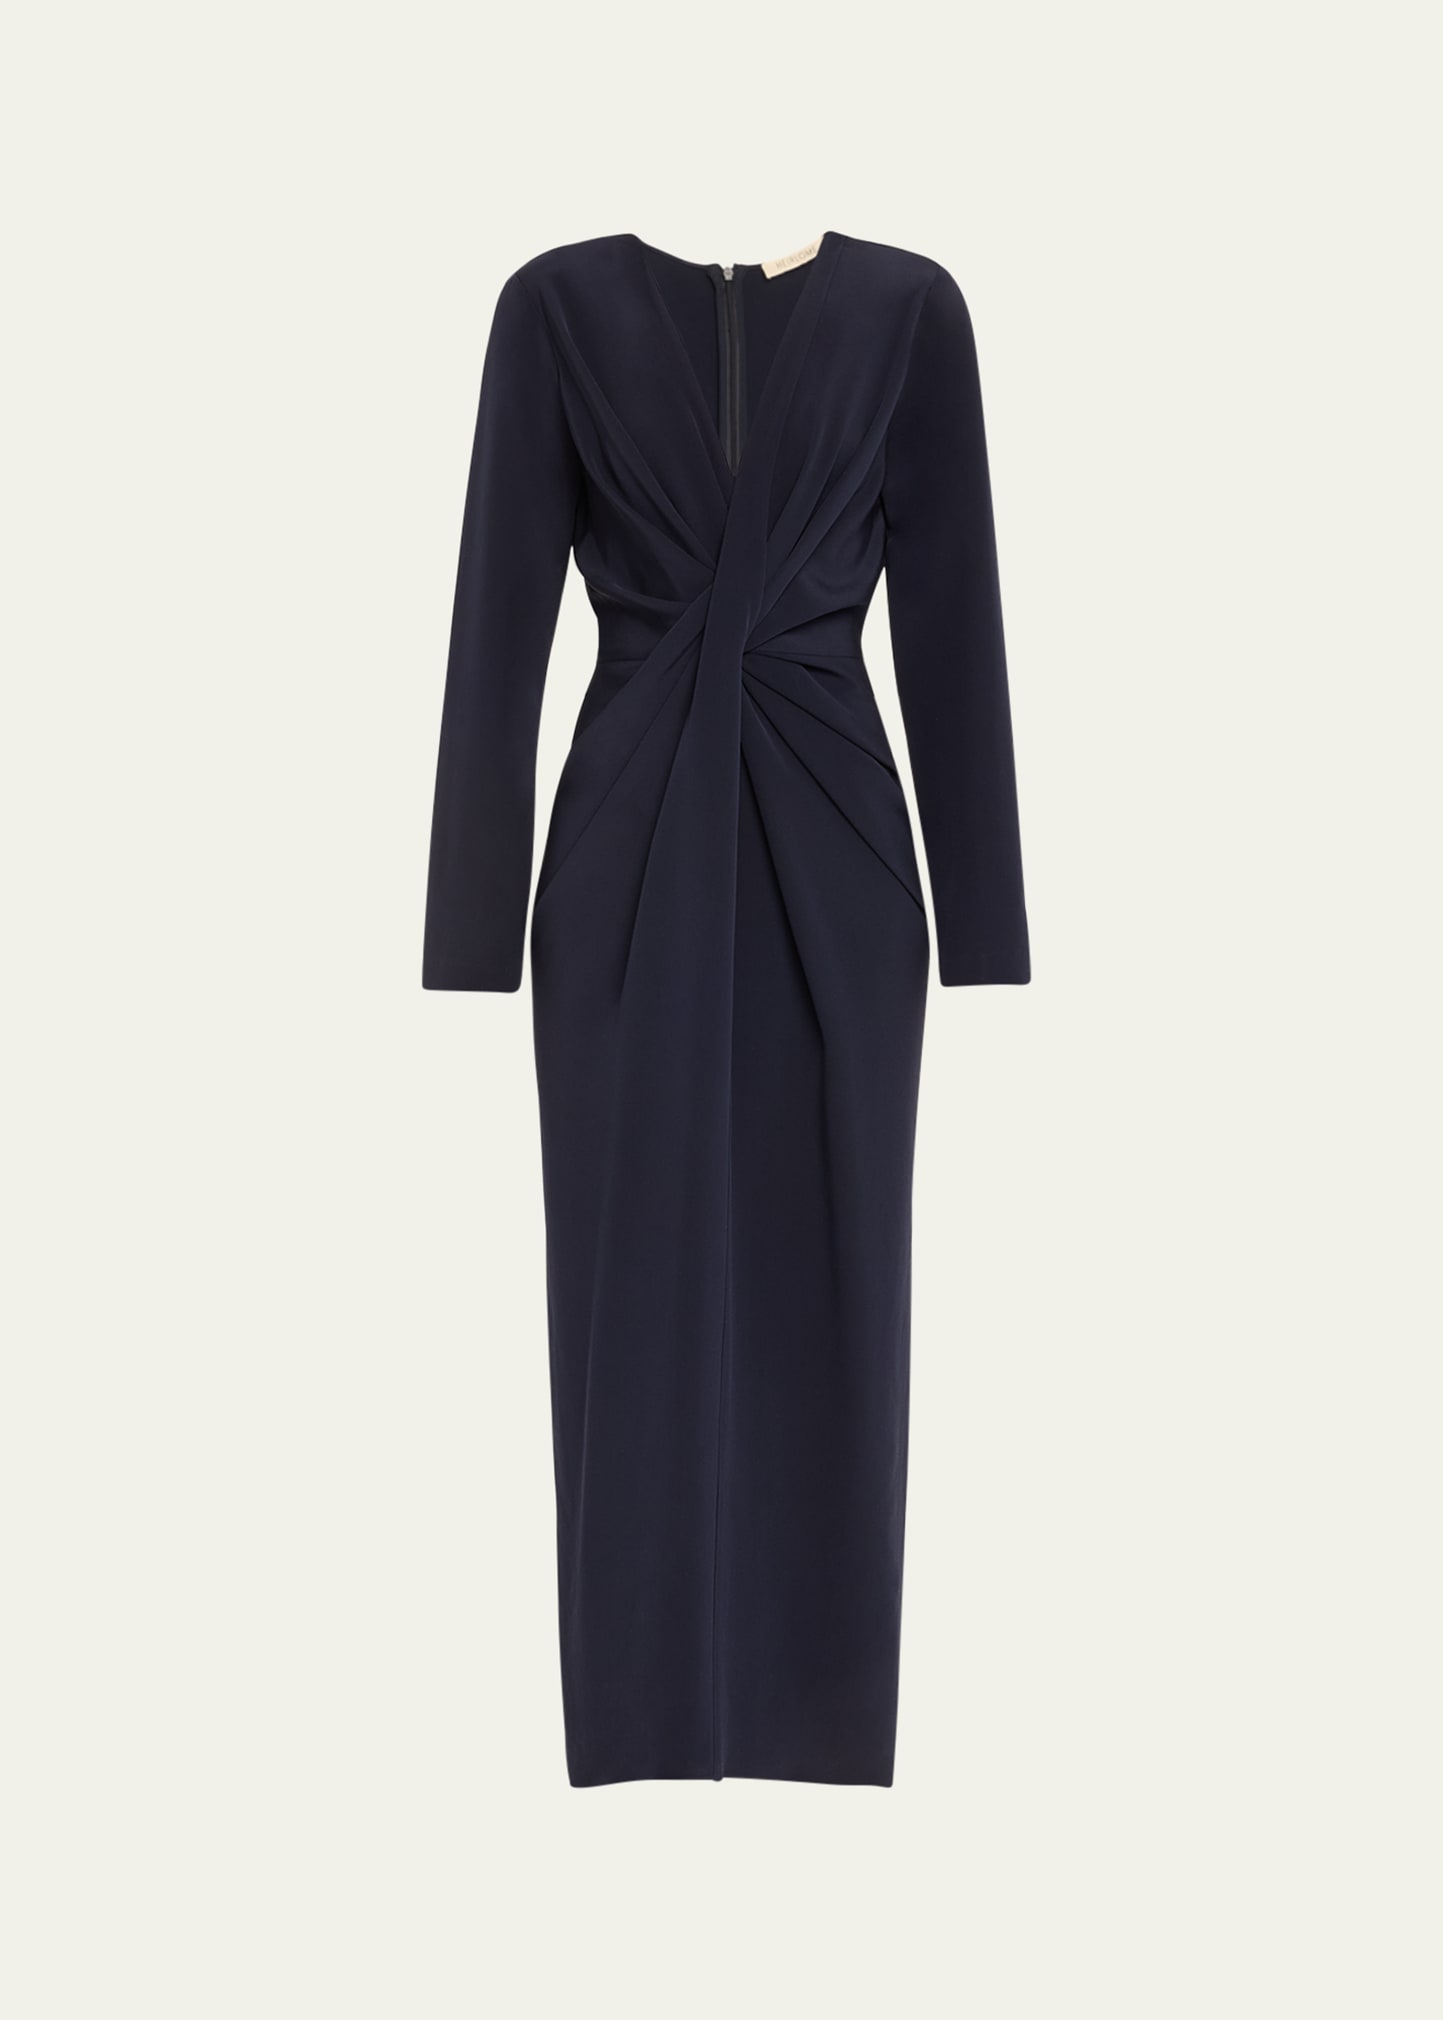 Heirlome Valentina Twist-front Draped Dress In Navy